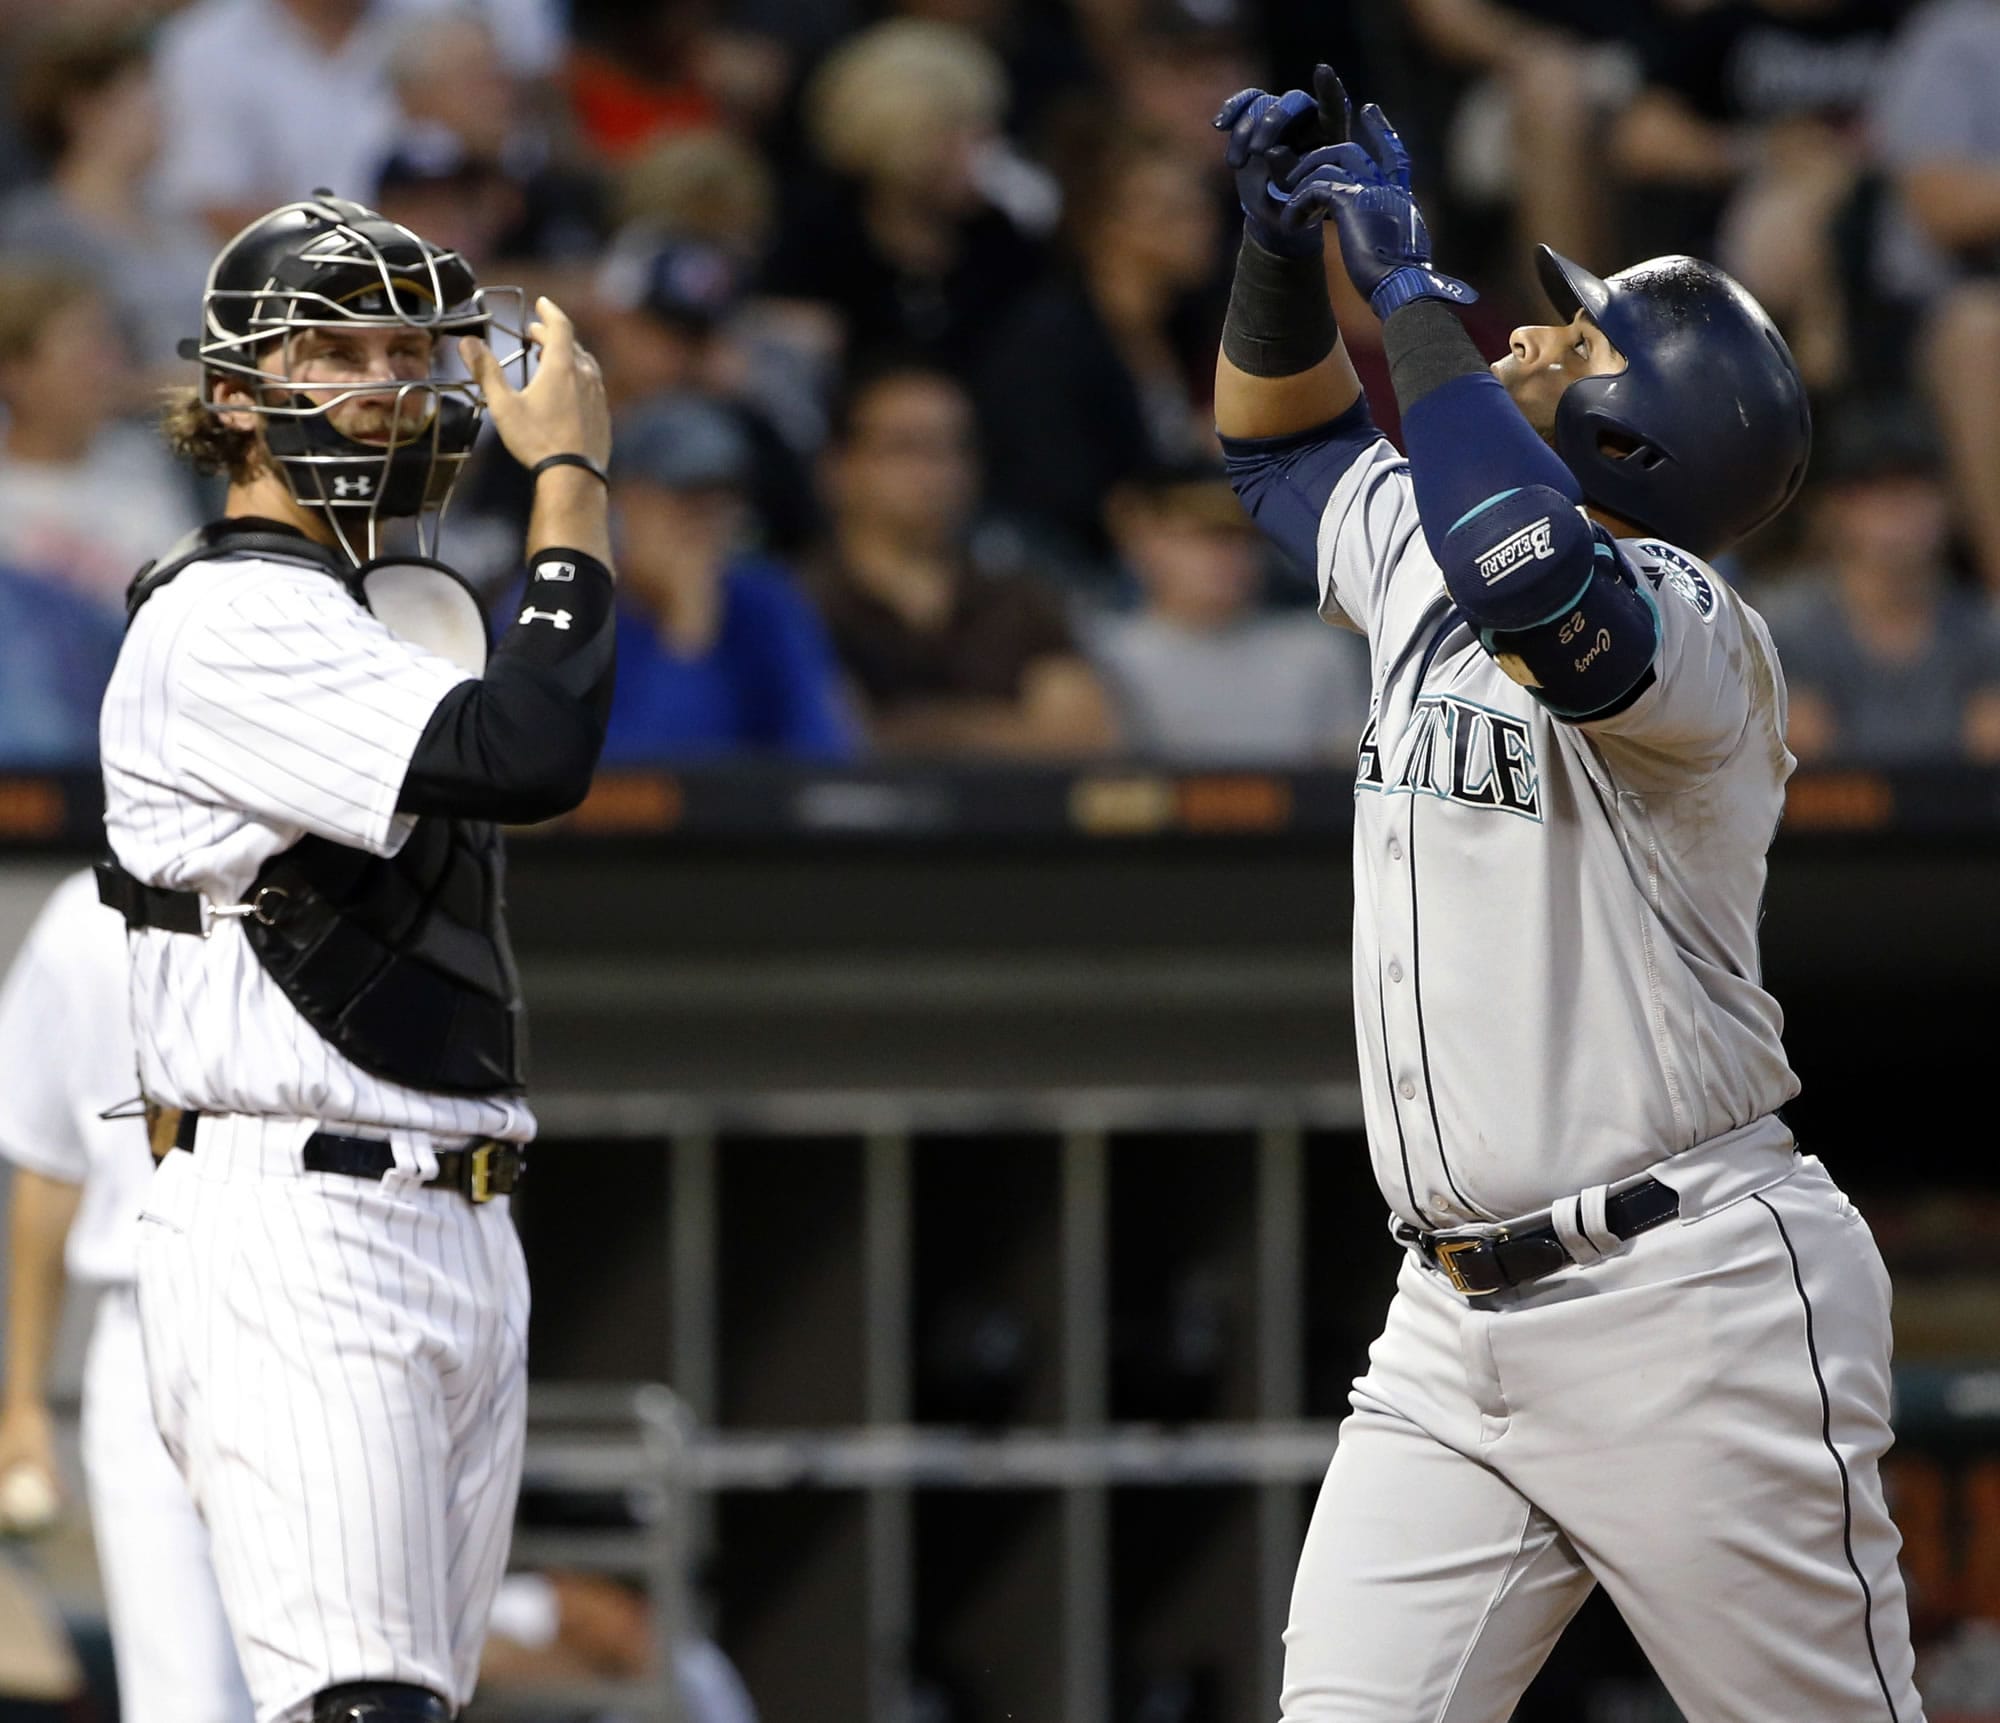 Seattle Mariners' Nelson Cruz, right, celebrates after hitting a two-run home run as Chicago White Sox catcher Kevan Smith looks to the field during the sixth inning of a baseball game Saturday, July 15, 2017, in Chicago. (AP Photo/Nam Y.